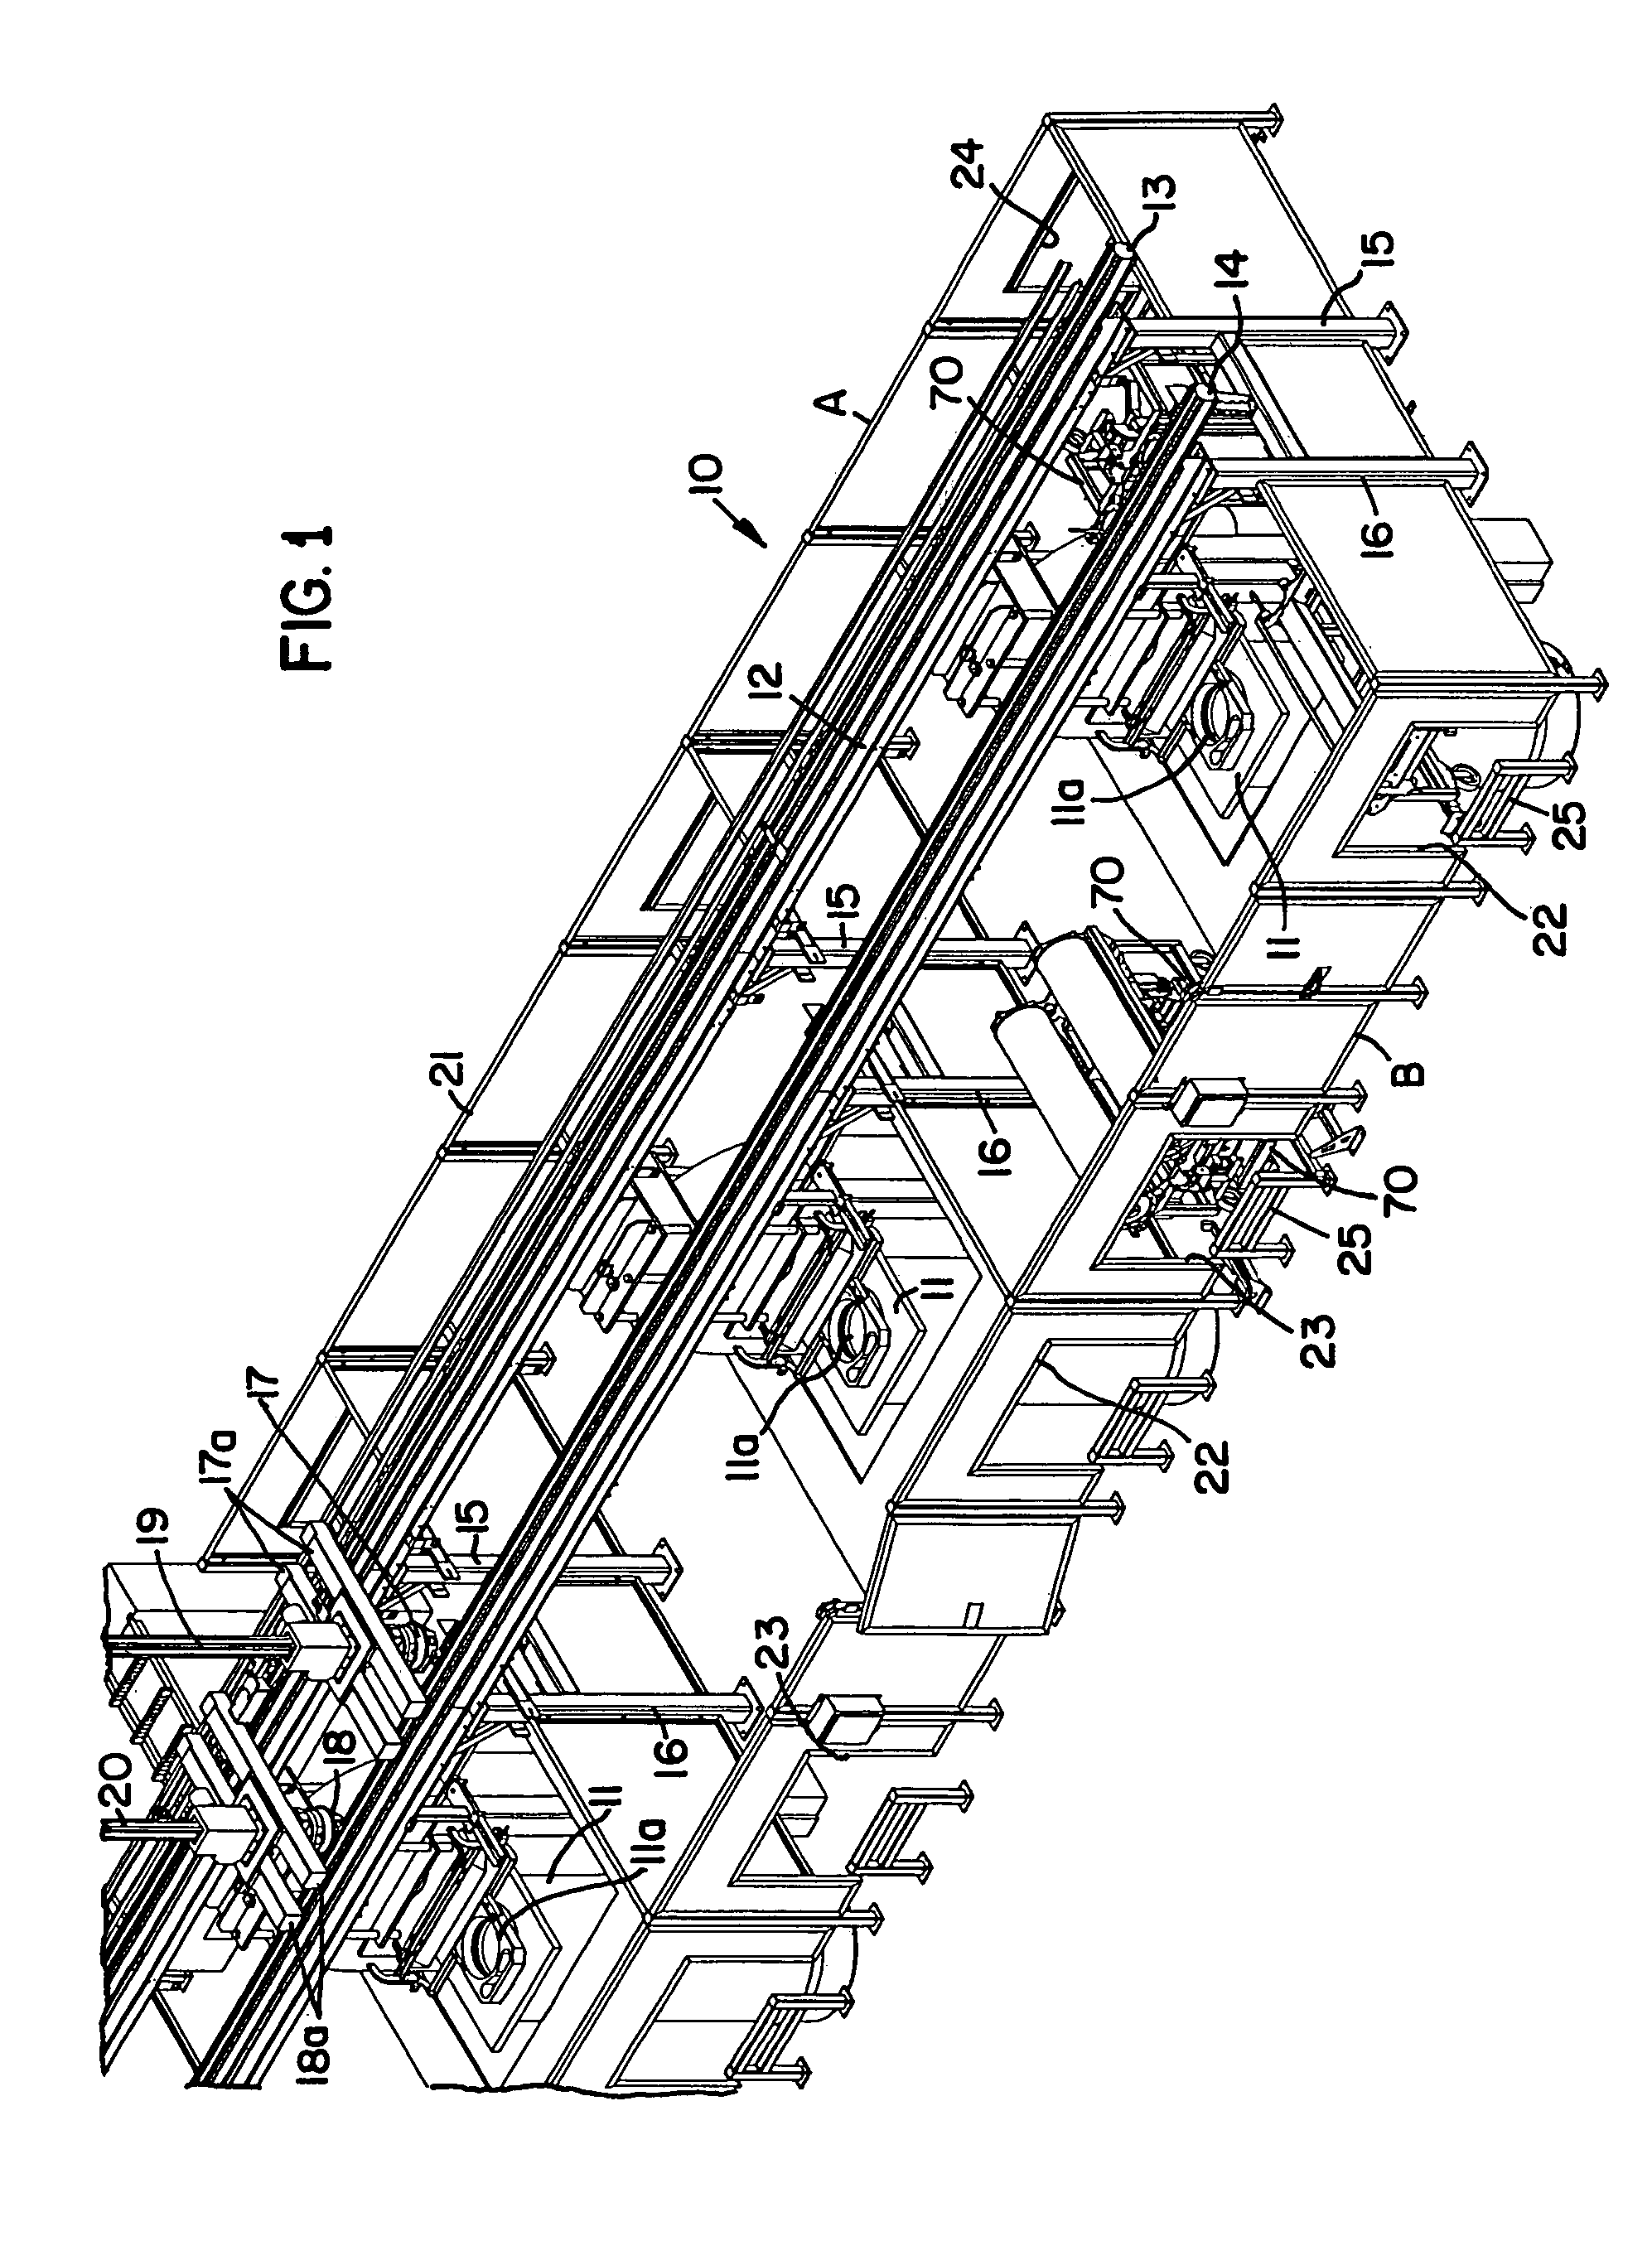 Method and apparatus for material handling for a food product using high pressure pasteurization